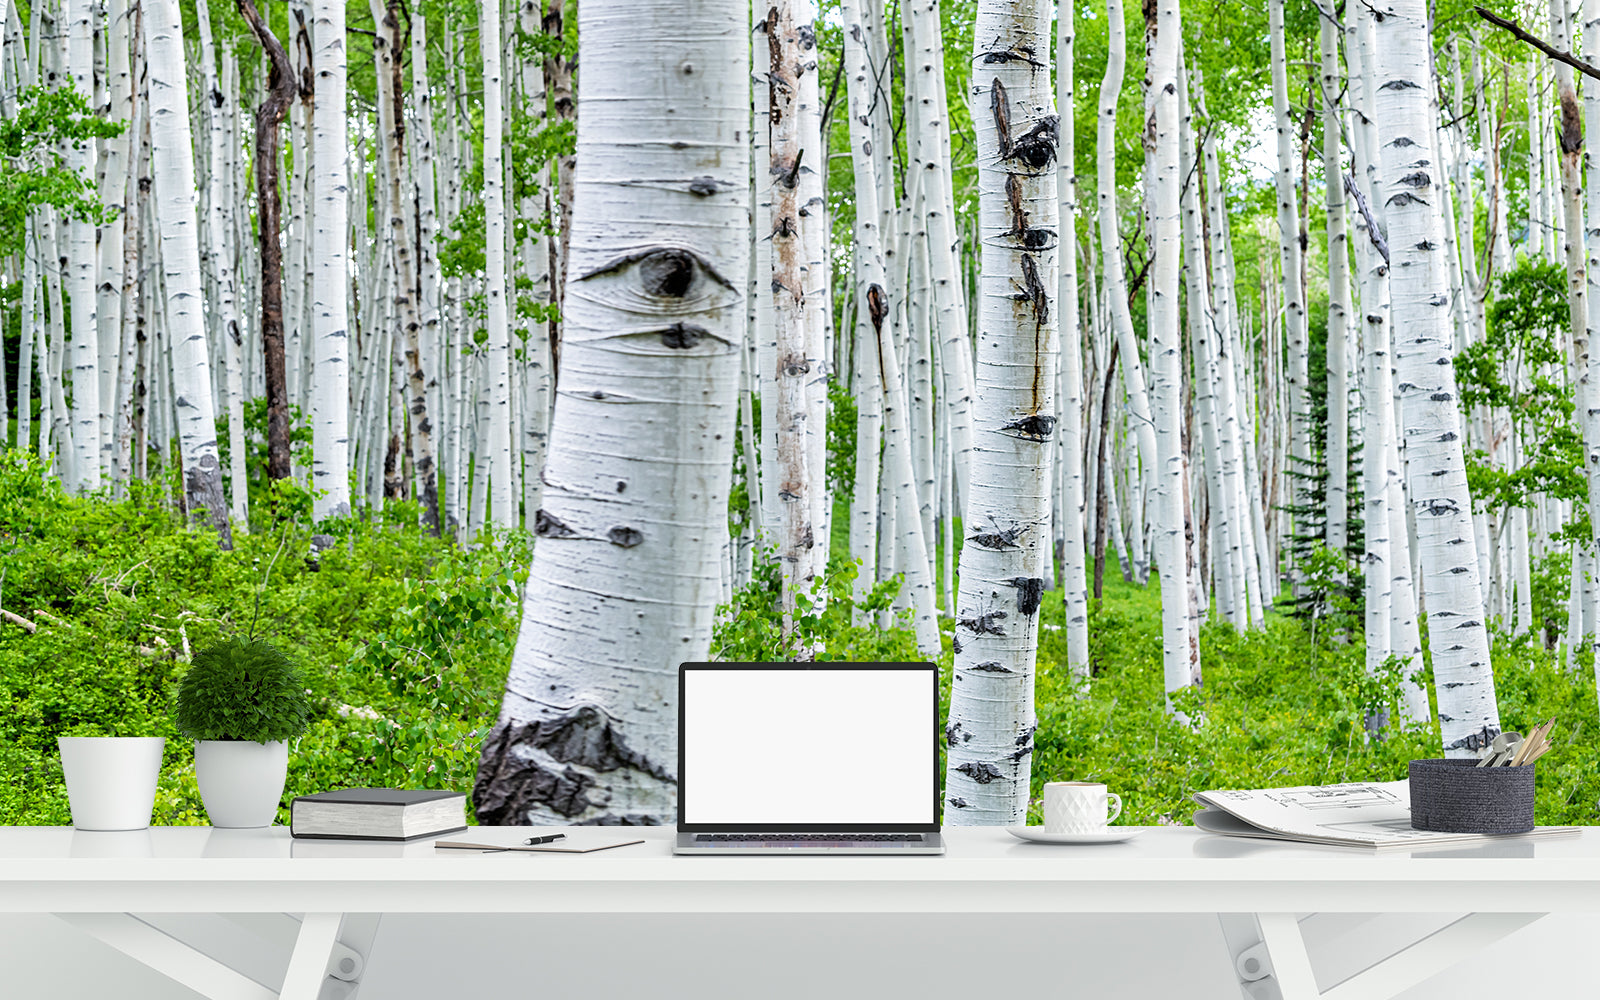 A breath of fresh air, with the rich textures of a birch forest.